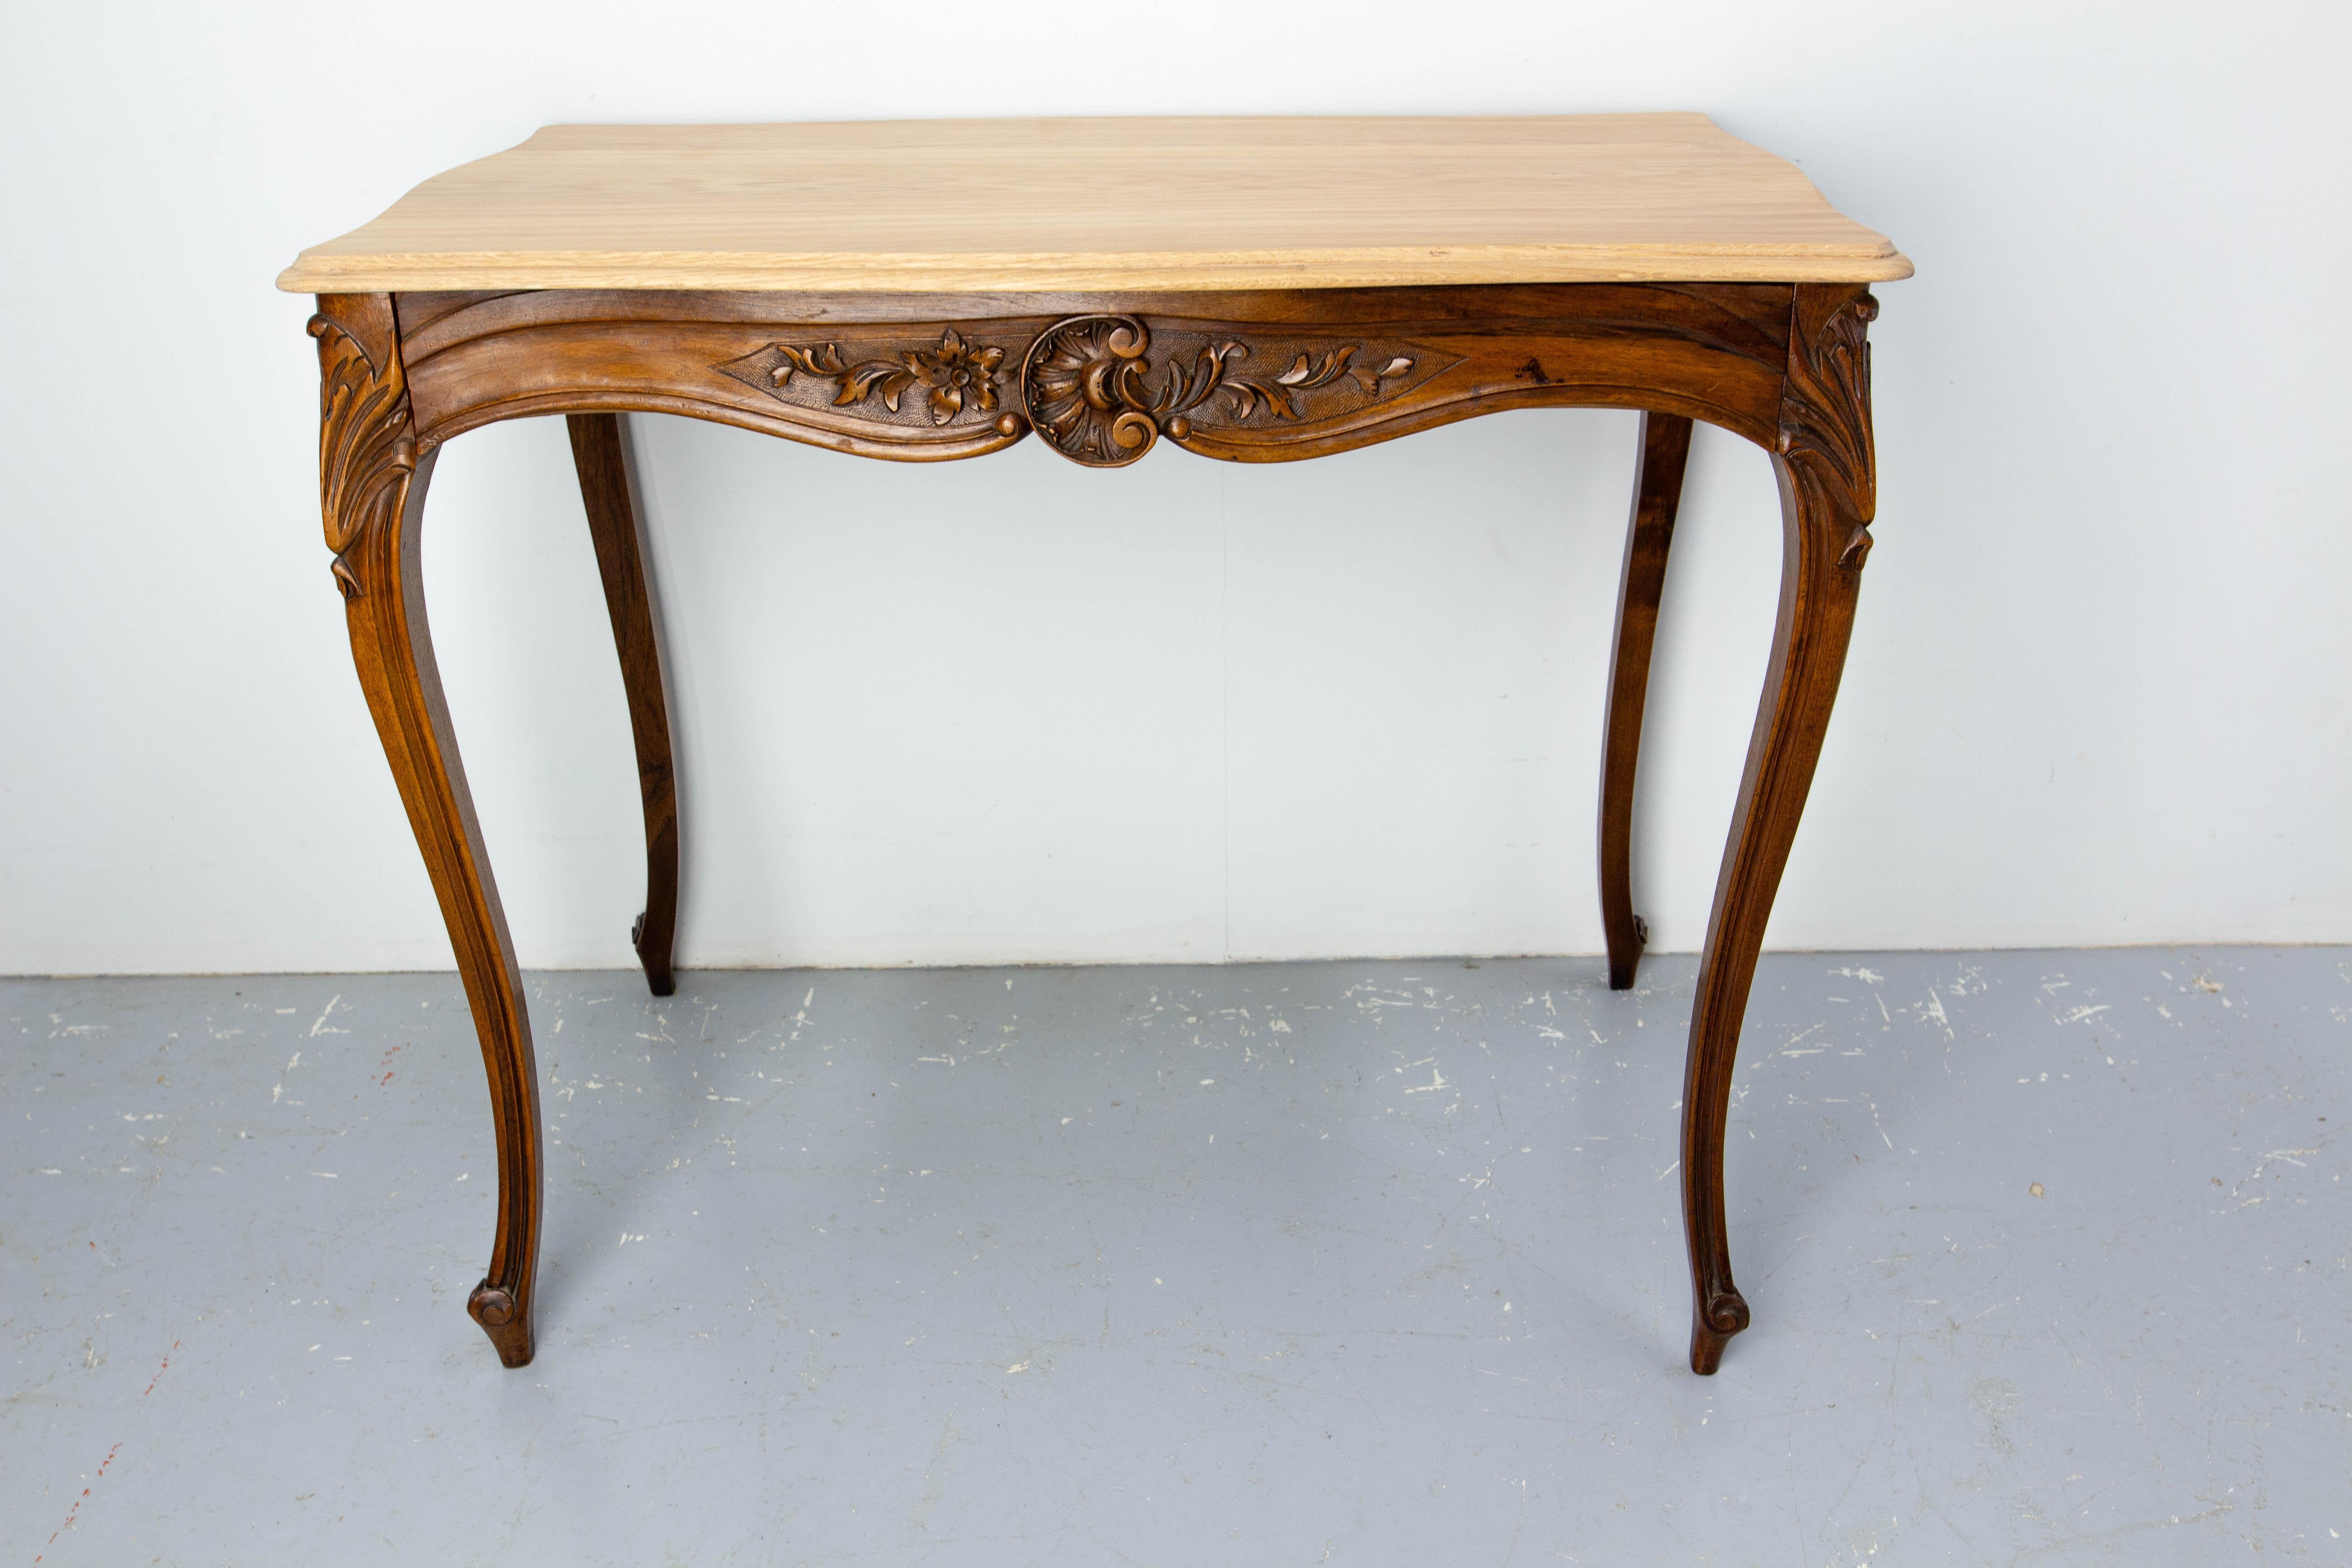 French Walnut & Oak Side Table in the Louis XV Style with Hiden Drawer, c. 1900 For Sale 6